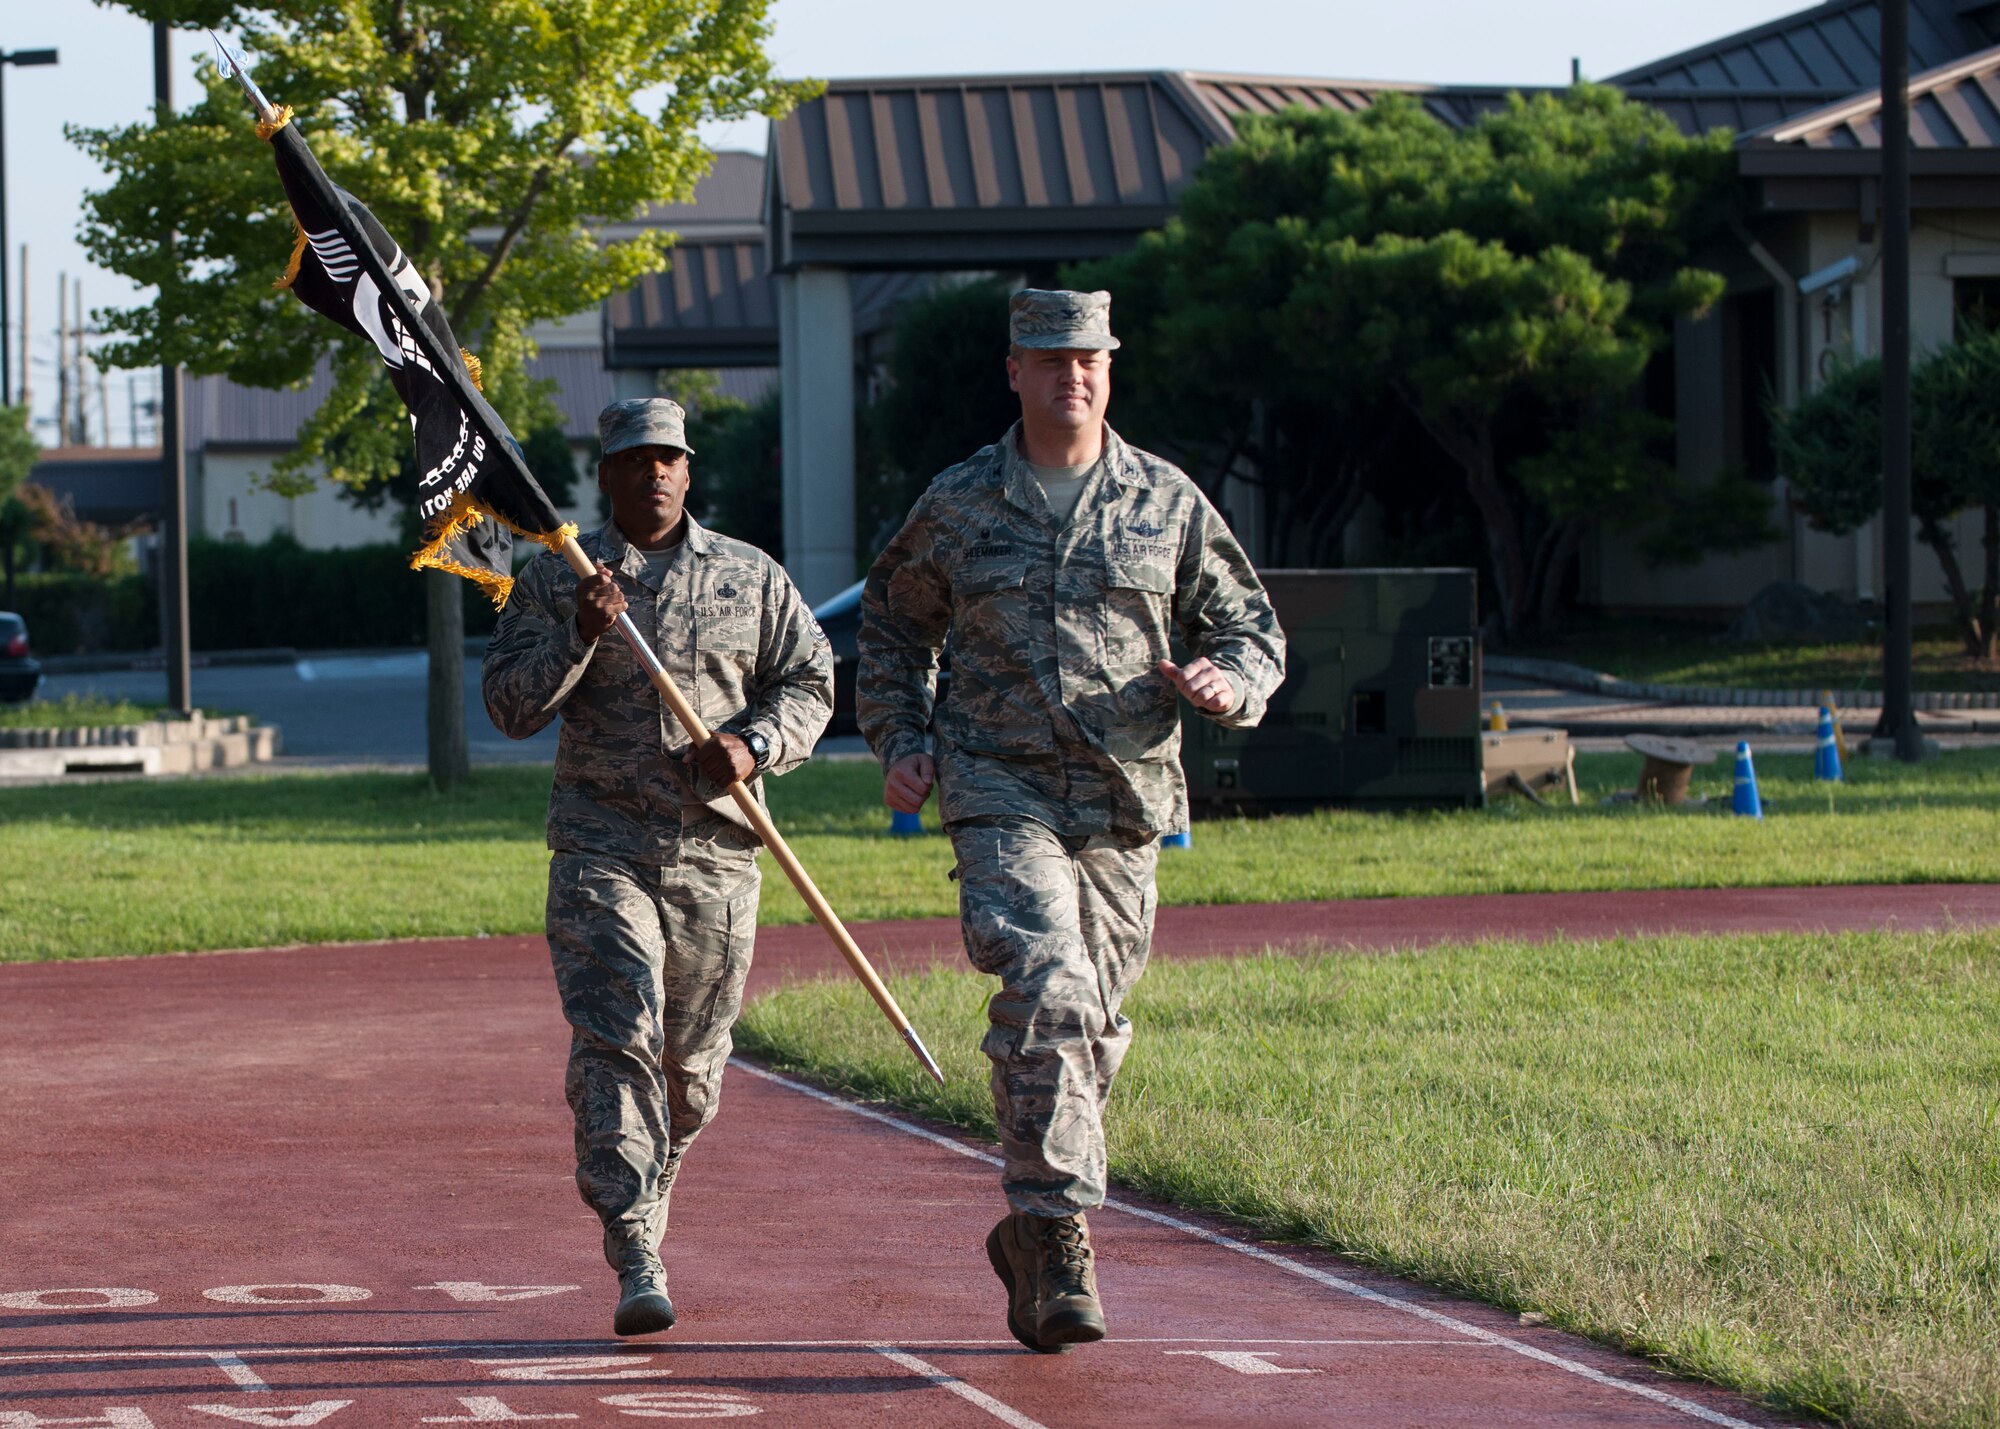 U.S. Air Force Col. David G. Shoemaker, 8th Fighter Wing commander, and Chief Master Sgt. Reiko L. Meeks, 8th FW command chief, run with the Prisoner of War and Missing in Action flag during the opening ceremony of POW/MIA Recognition Day at Kunsan Air Base, Republic of Korea, Sept. 14, 2017. Shoemaker and Meeks ran the first leg of the 24-hour run in remembrance of the POW/MIA service members. (U.S. Air Force photo by Staff Sgt. Victoria H. Taylor)